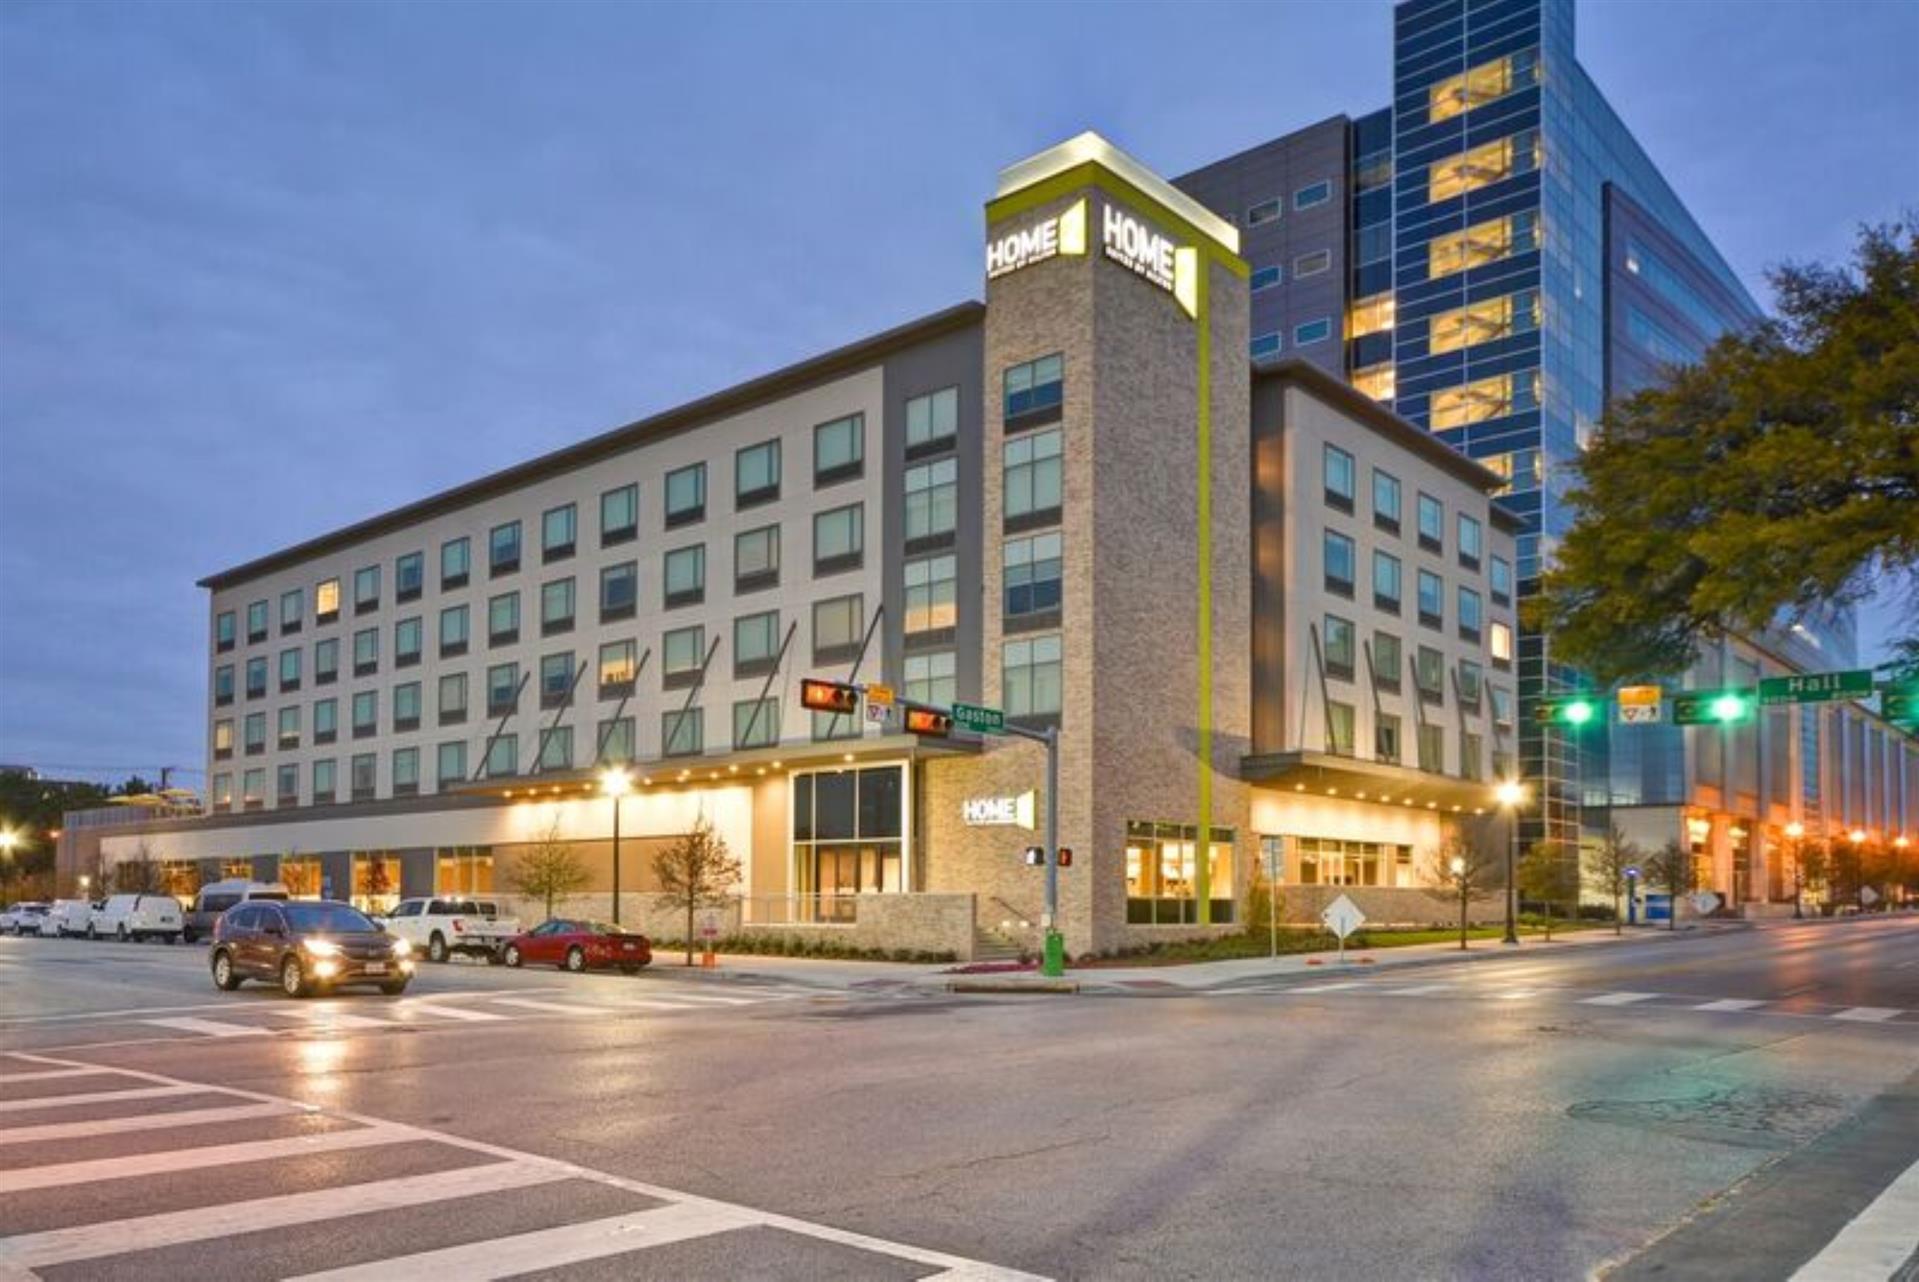 Home2 Suites by Hilton Dallas Downtown at Baylor Scott & White in Dallas, TX